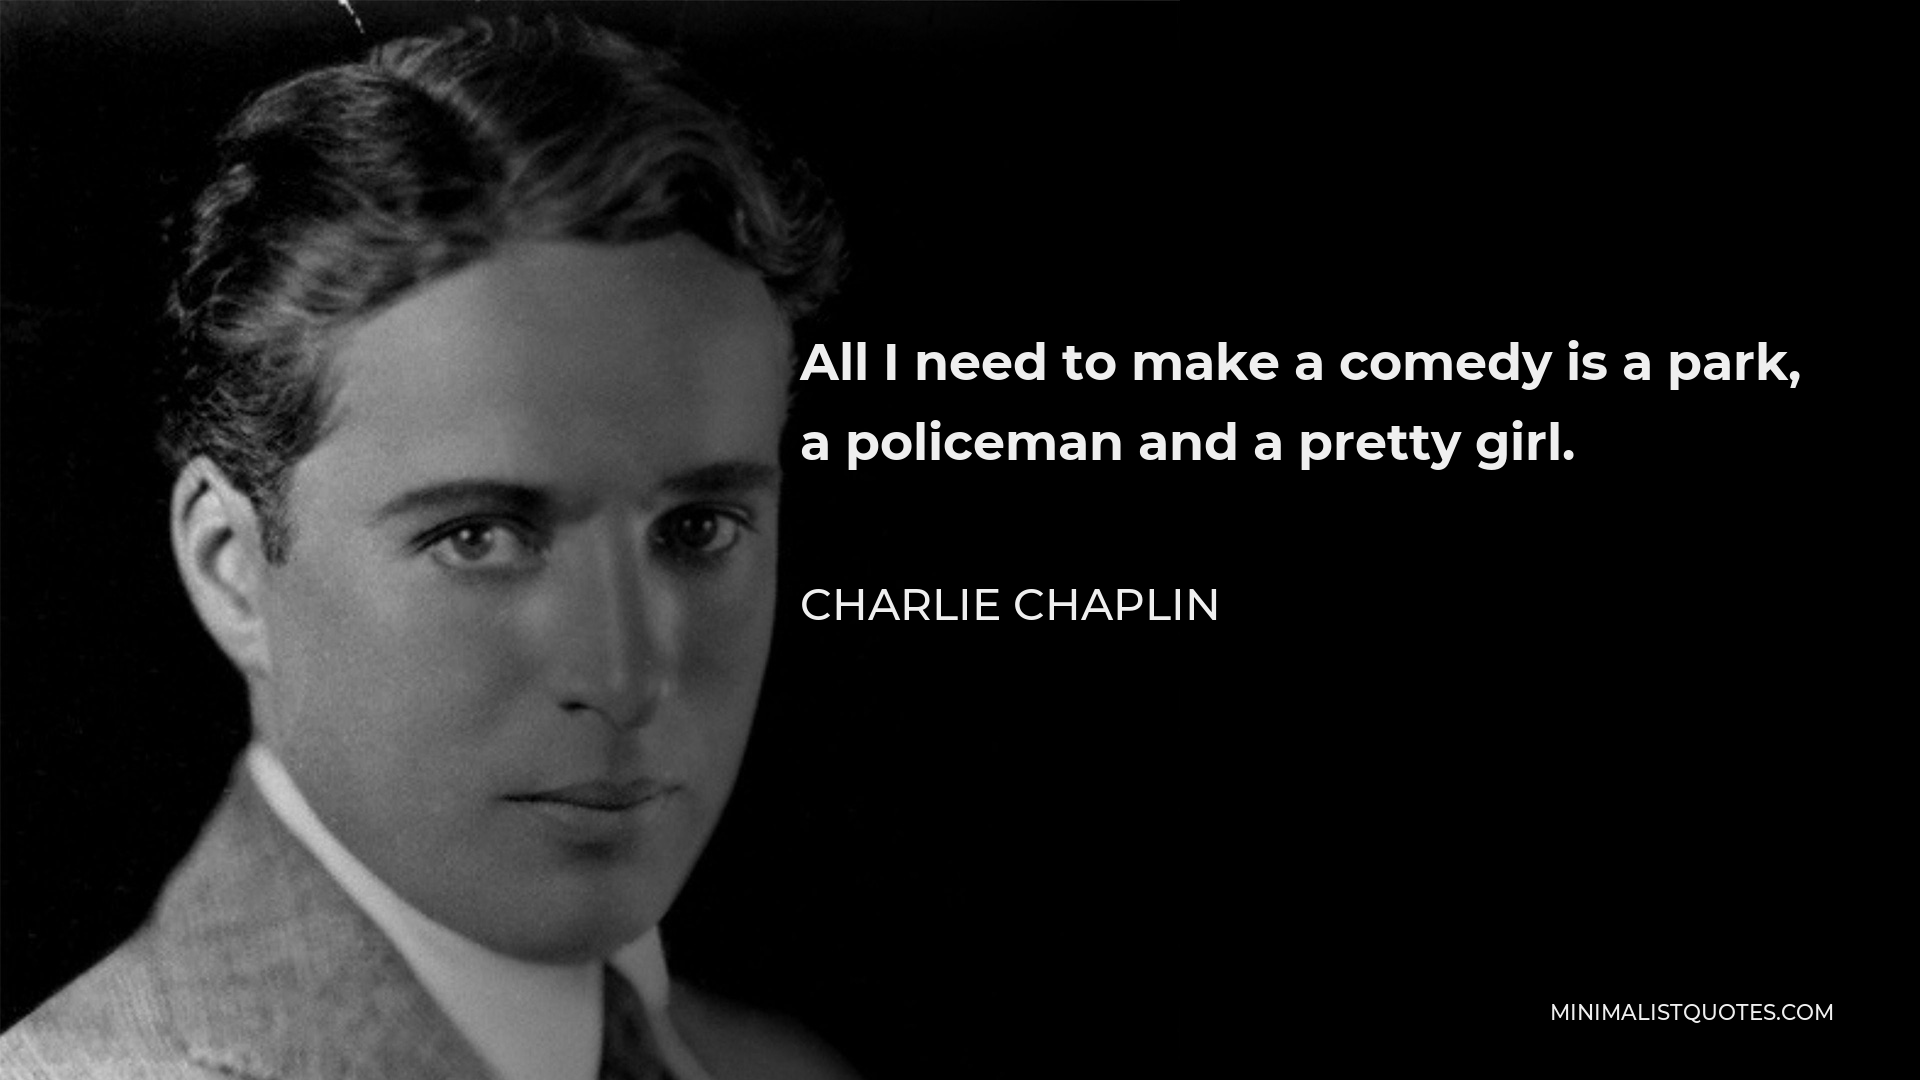 Charlie Chaplin Quote - All I need to make a comedy is a park, a policeman and a pretty girl.